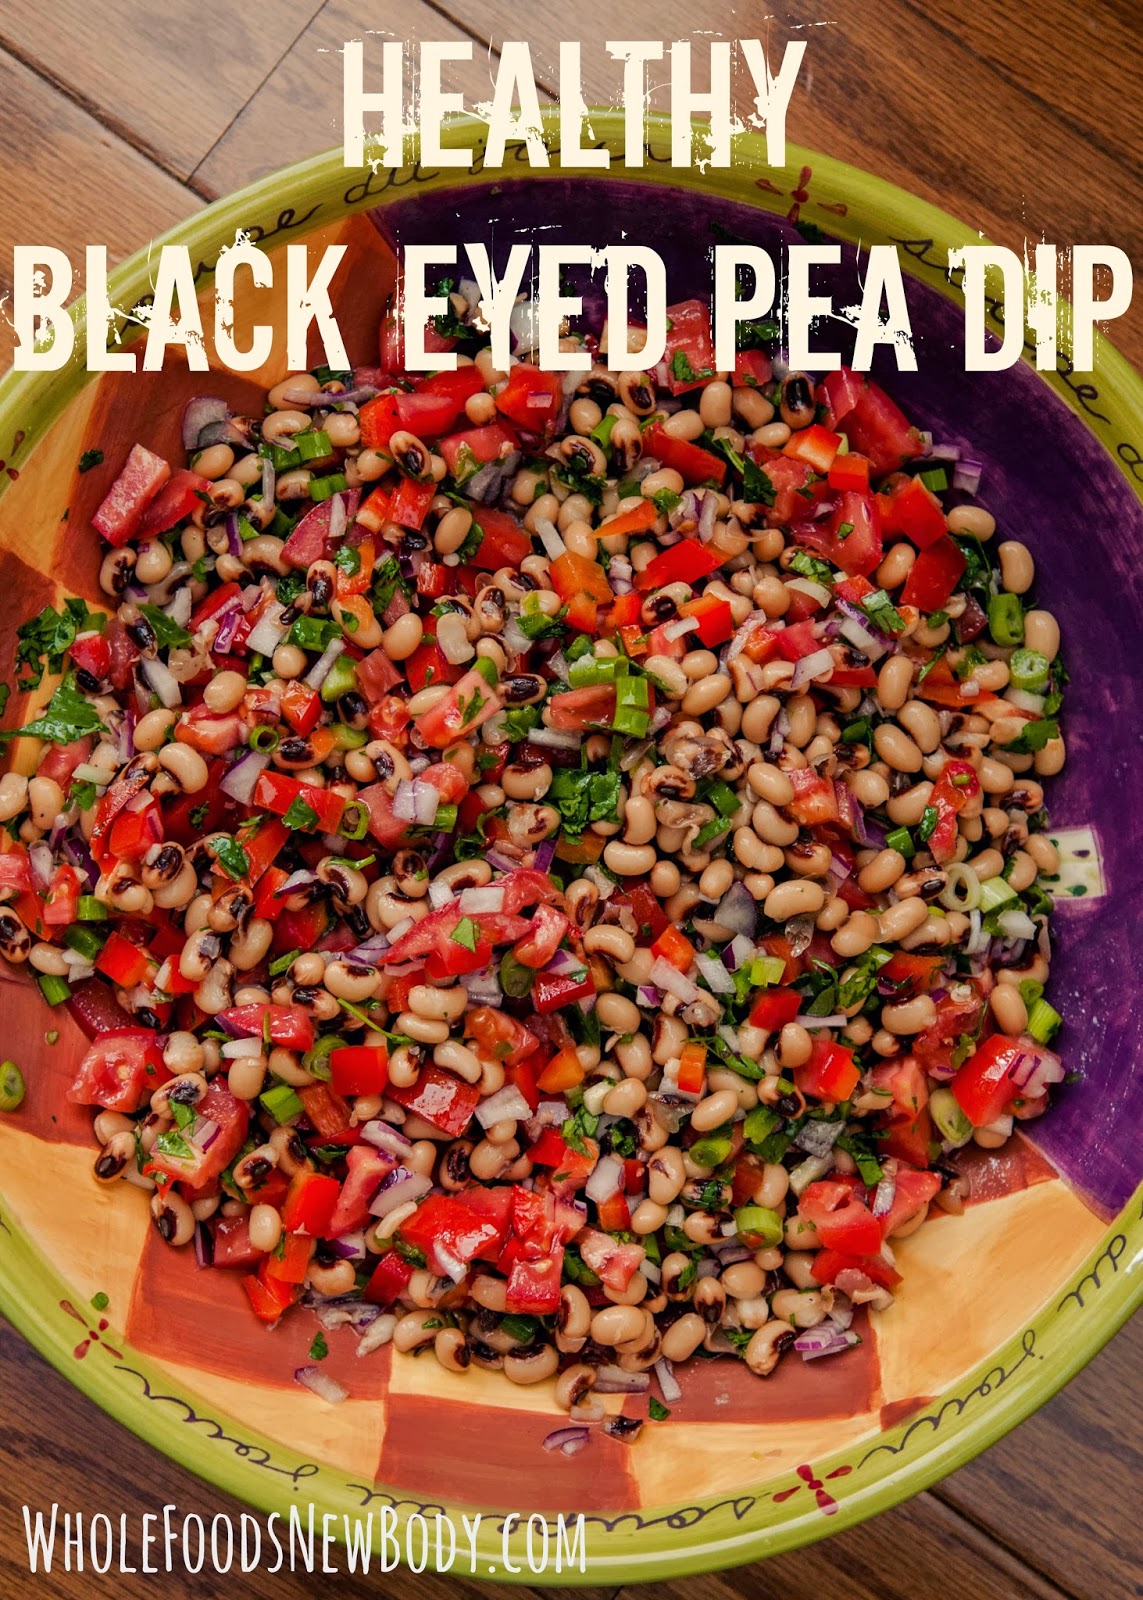 Whole Foods New Body: {Healthy Black Eyed Pea Dip}